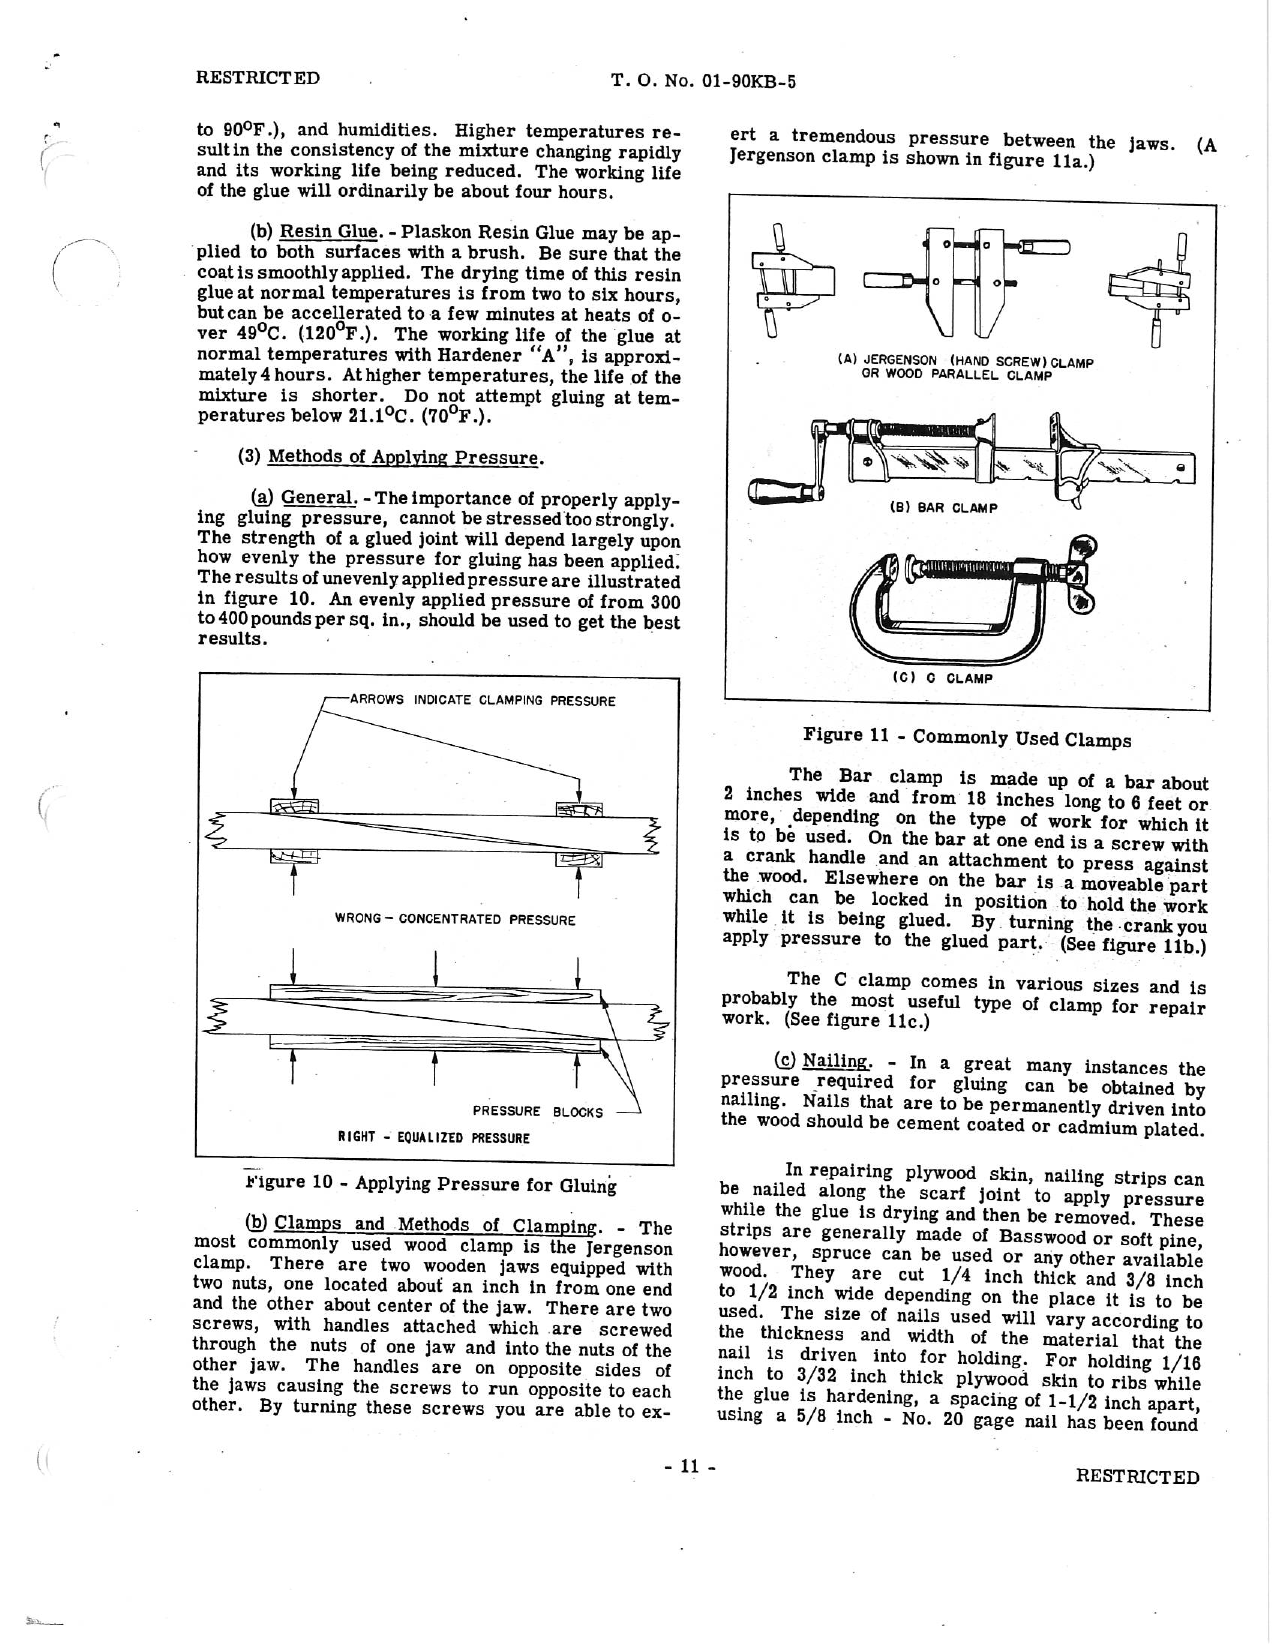 Sample page 15 from AirCorps Library document: Structural Repair Instructions: AT-10